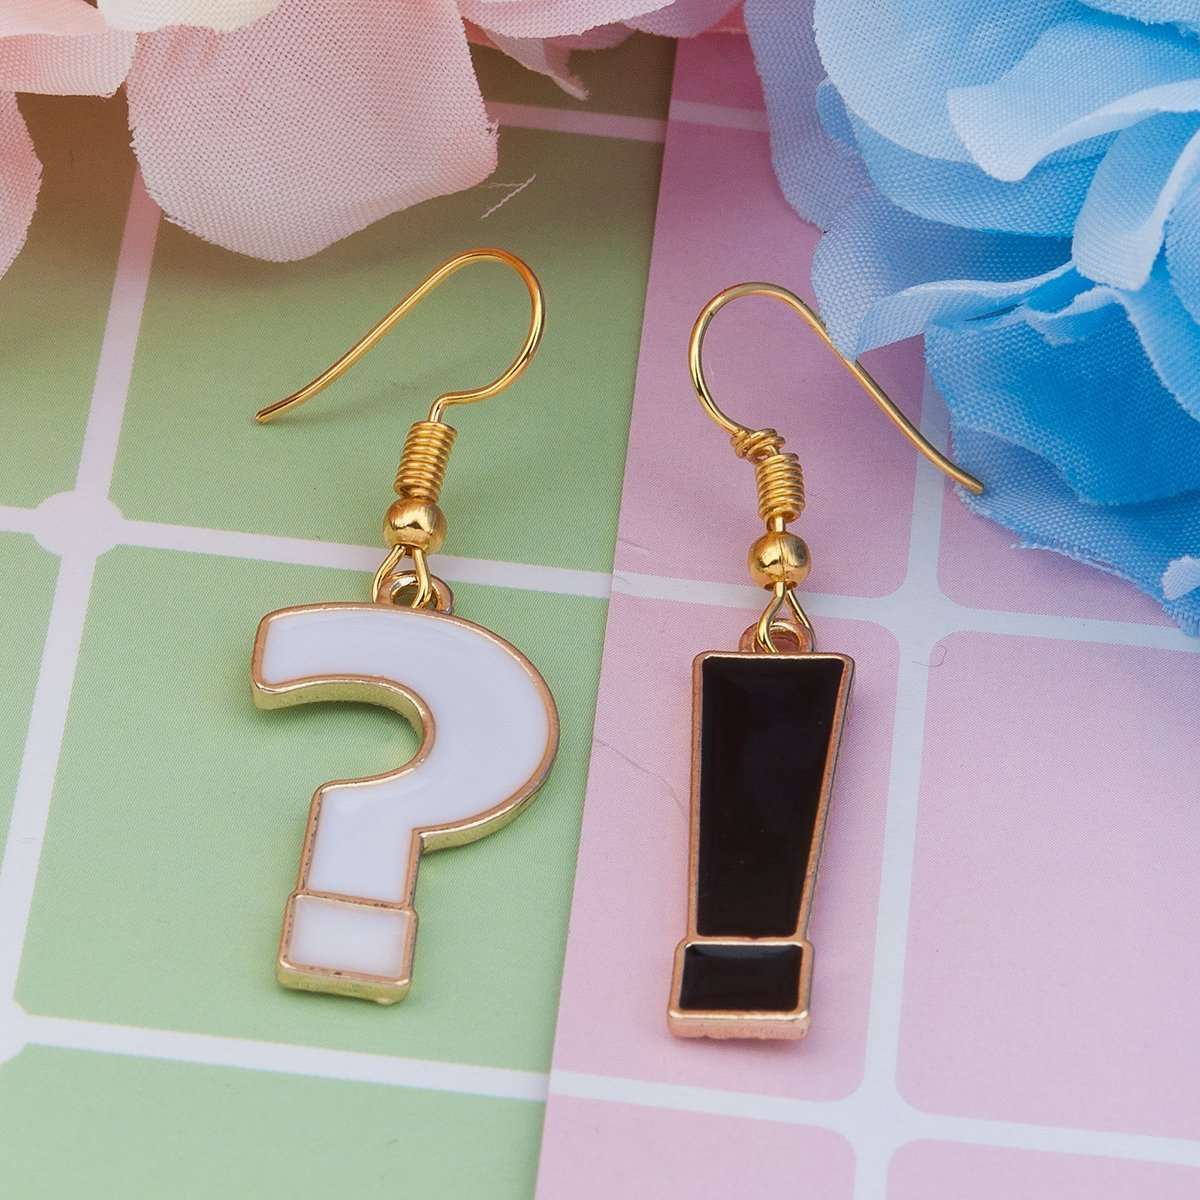 Gold Trim Black and White Punctuation Earrings - My Custom Tee Party